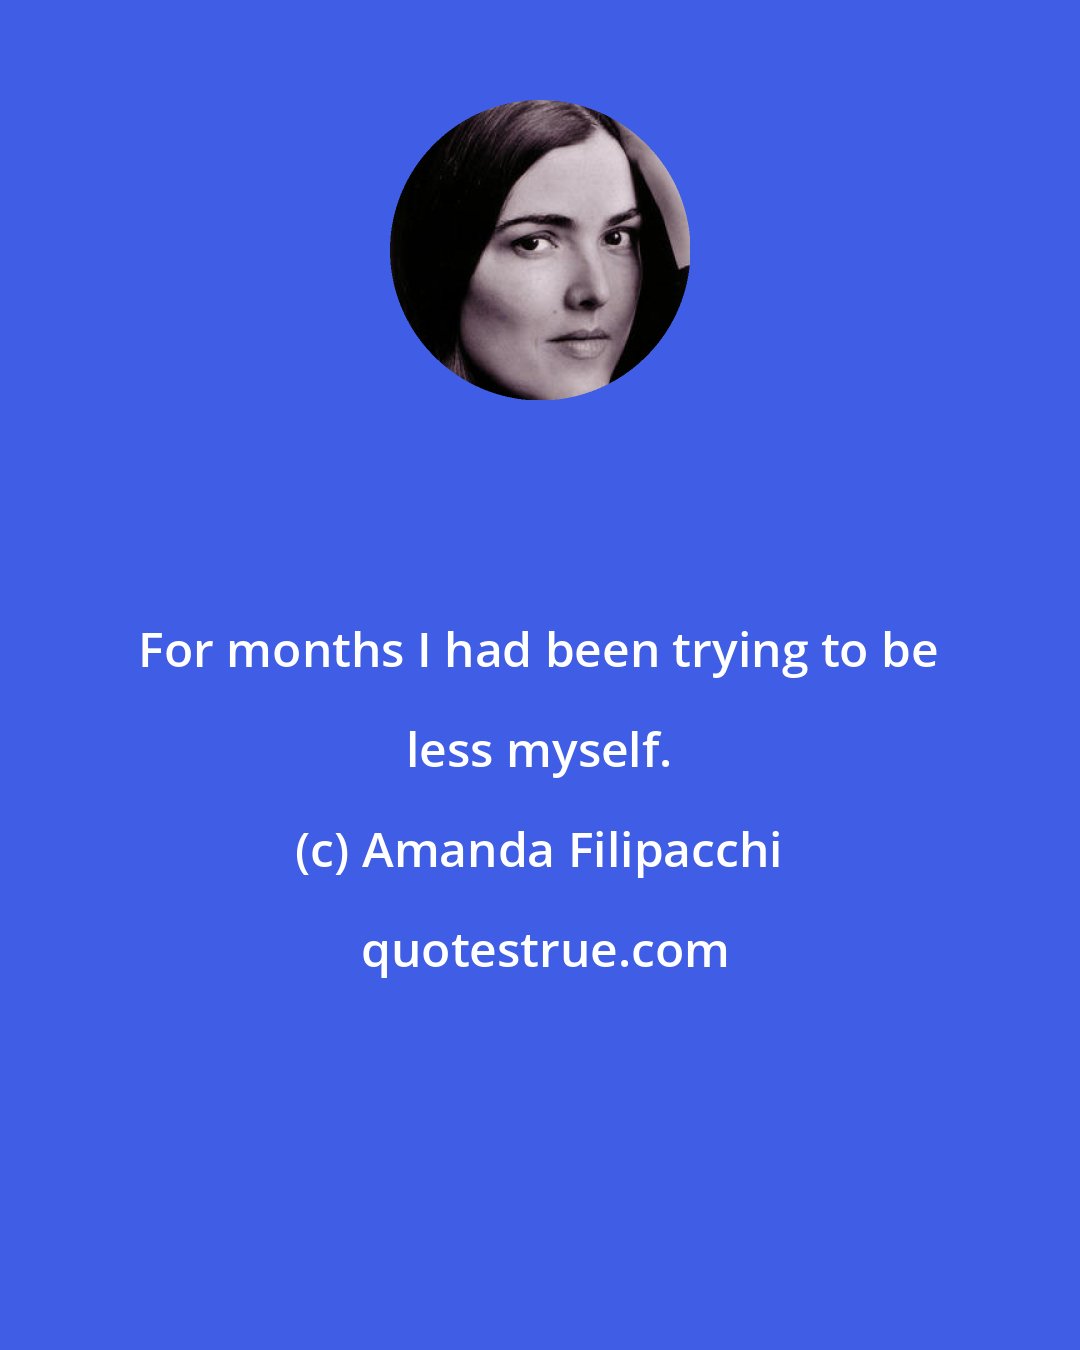 Amanda Filipacchi: For months I had been trying to be less myself.